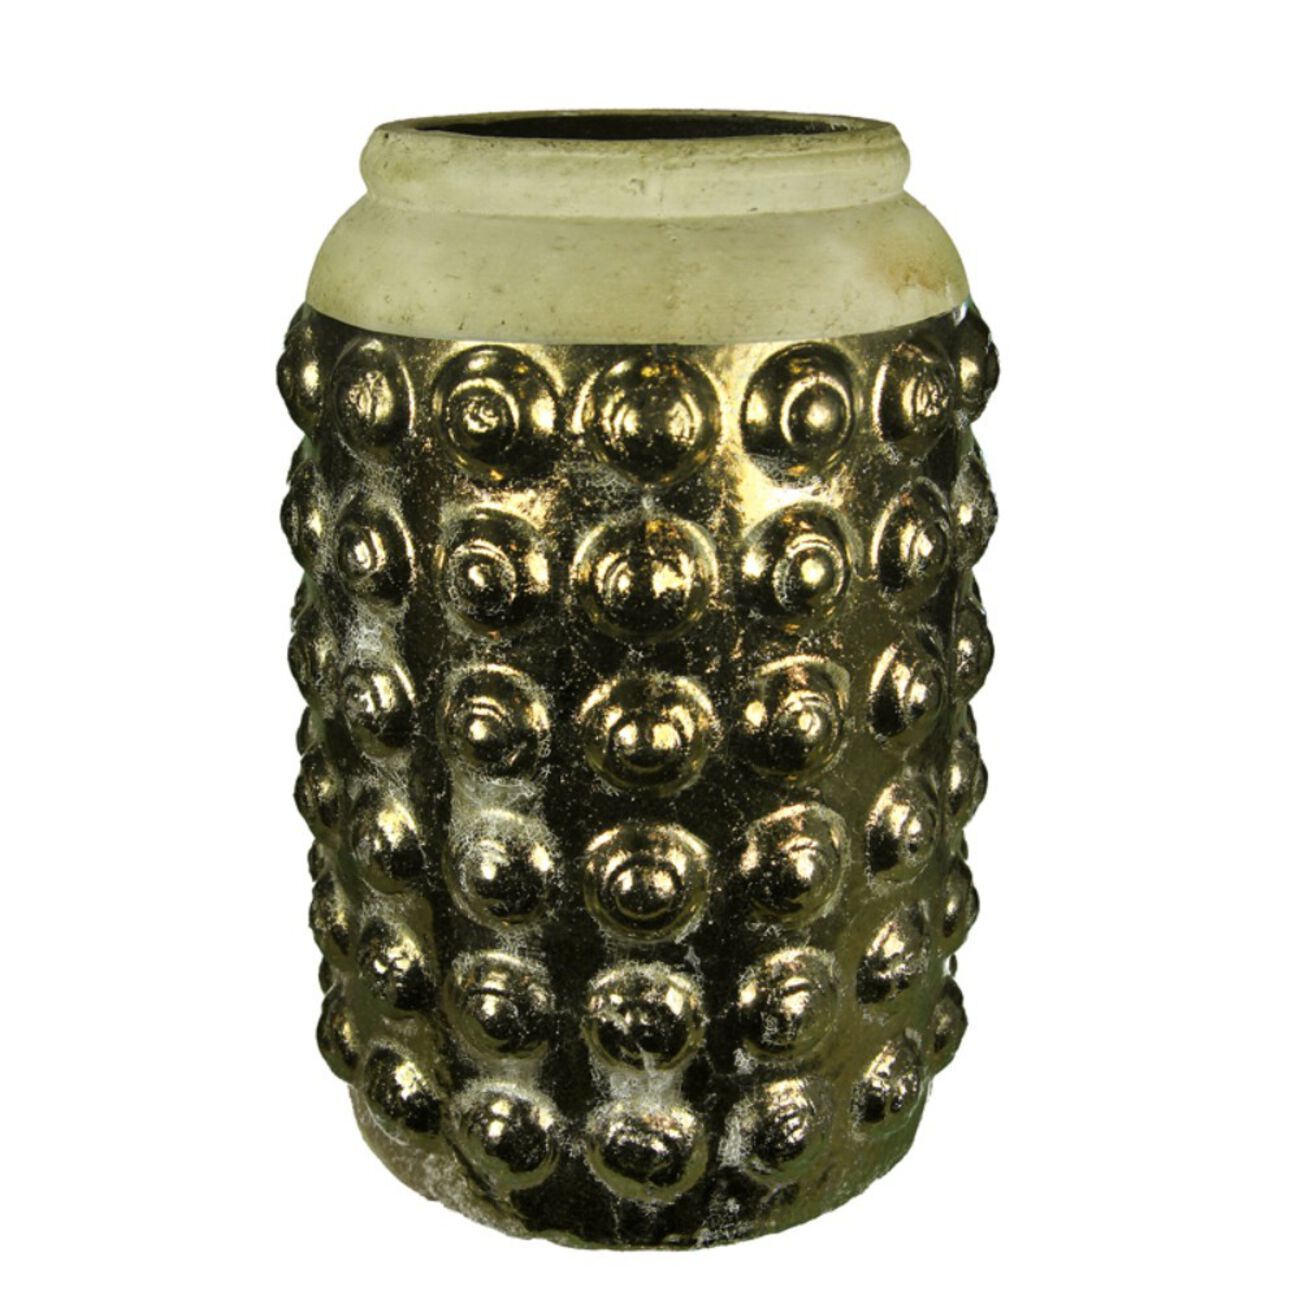 Ceramic Vase With Pimpled Pattern, Gold